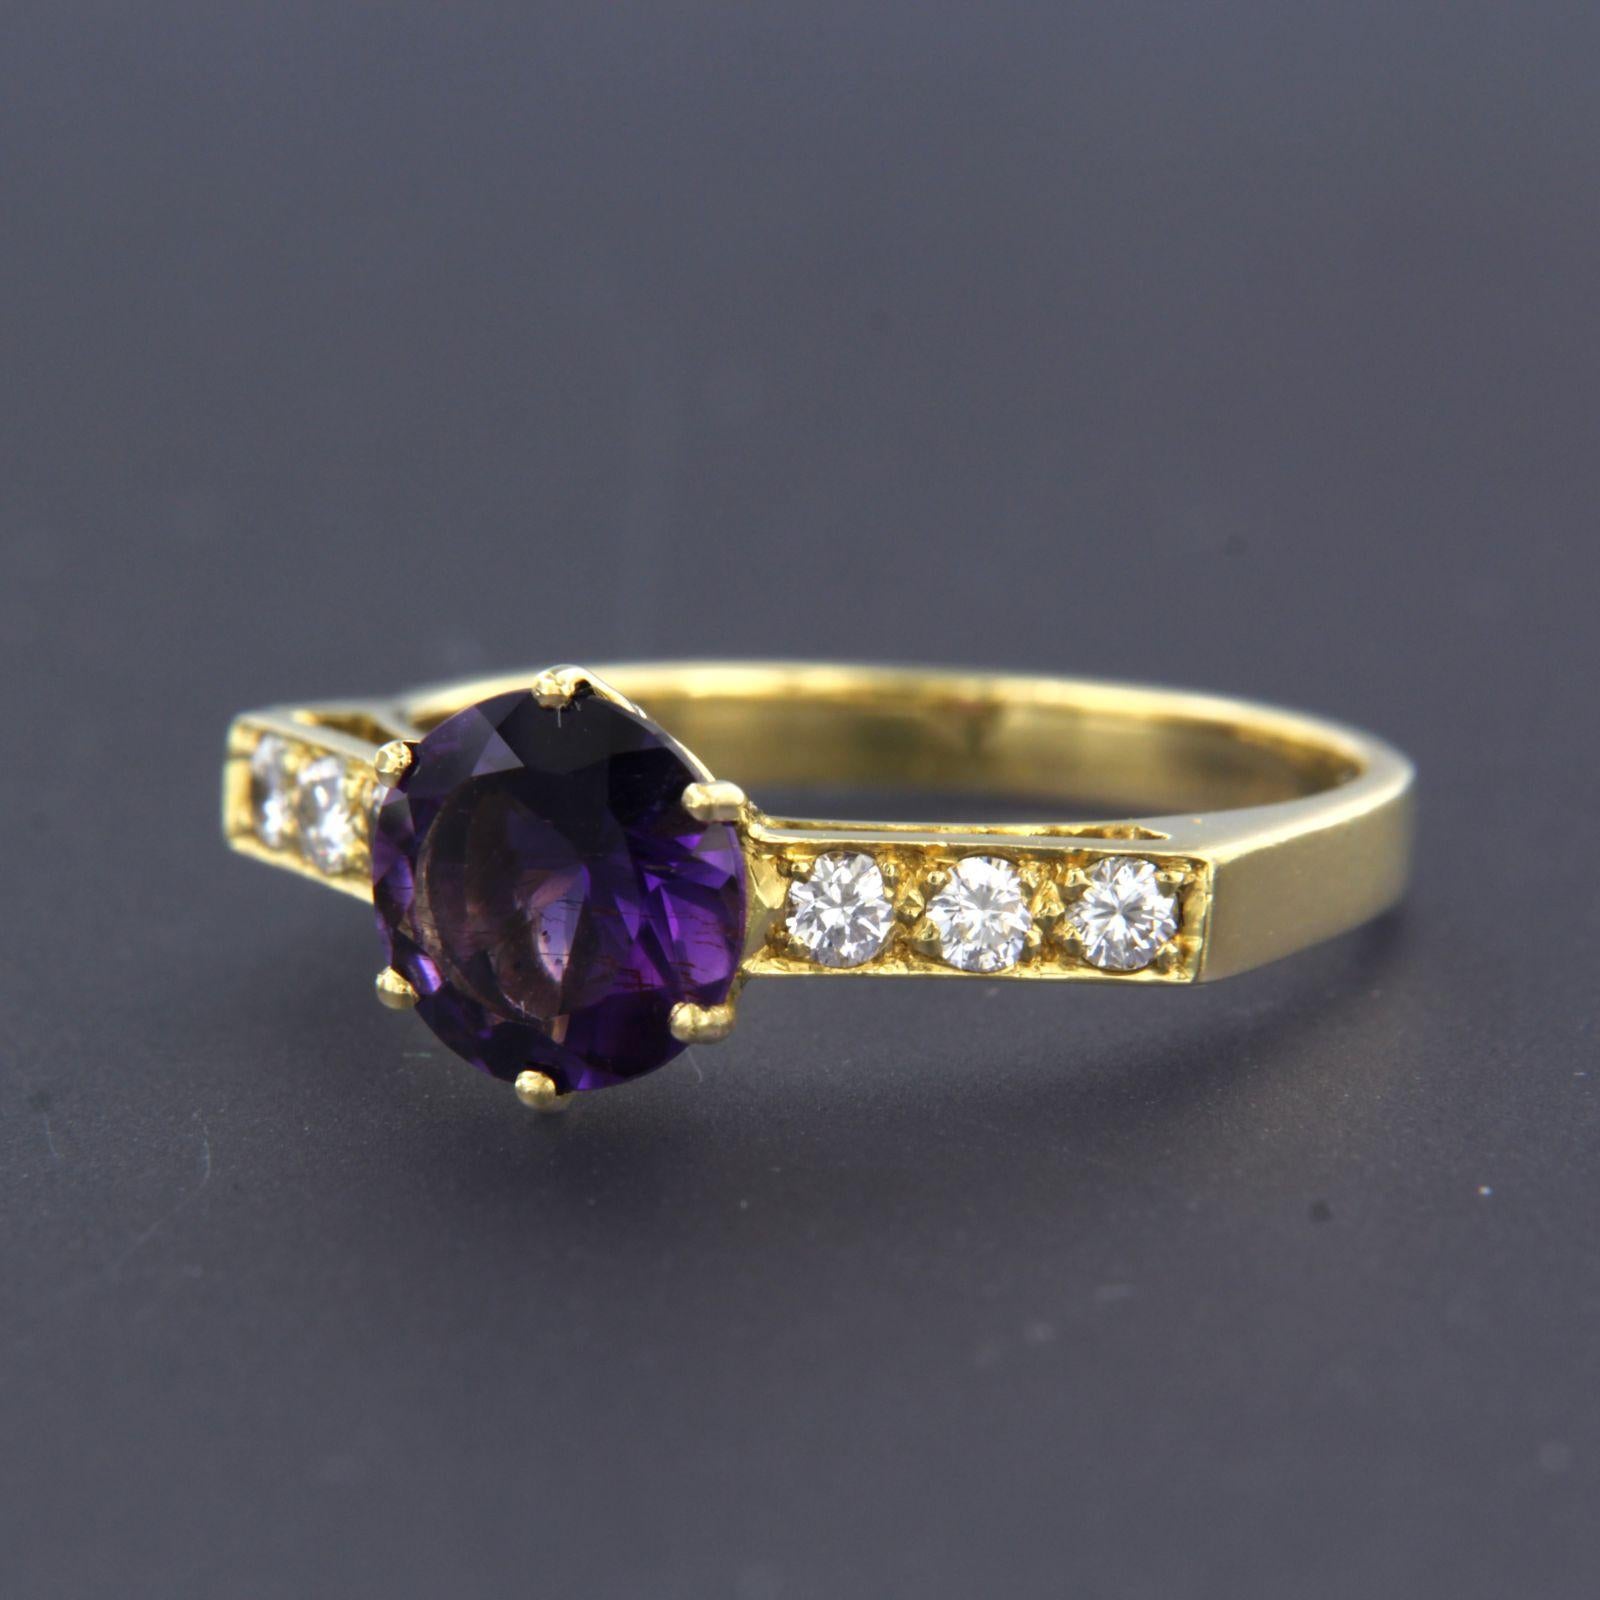 18k yellow gold ring set with amethyst and brilliant cut diamonds. 0.30ct - F/G - VS/SI - ring size US. 7.5 – EU 17.75(56)

detailed description:

The top of the ring is 8.4 mm wide by 6.0 mm high

Ring size US. 7.5 – EU 17.75(56), ring can be